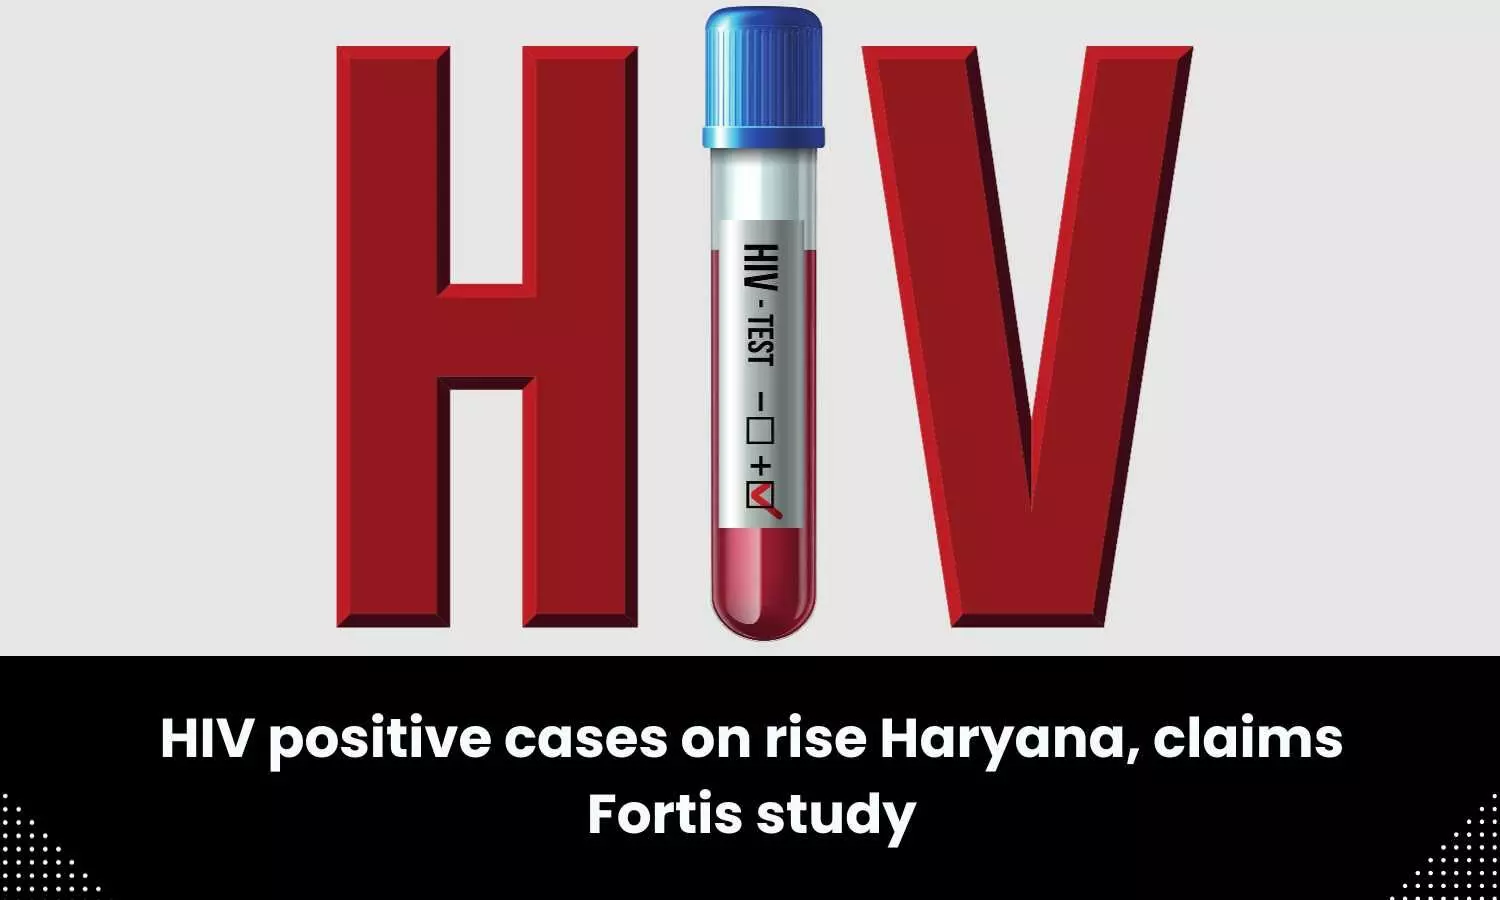 Fortis study claims HIV-positive cases on rise in Haryana